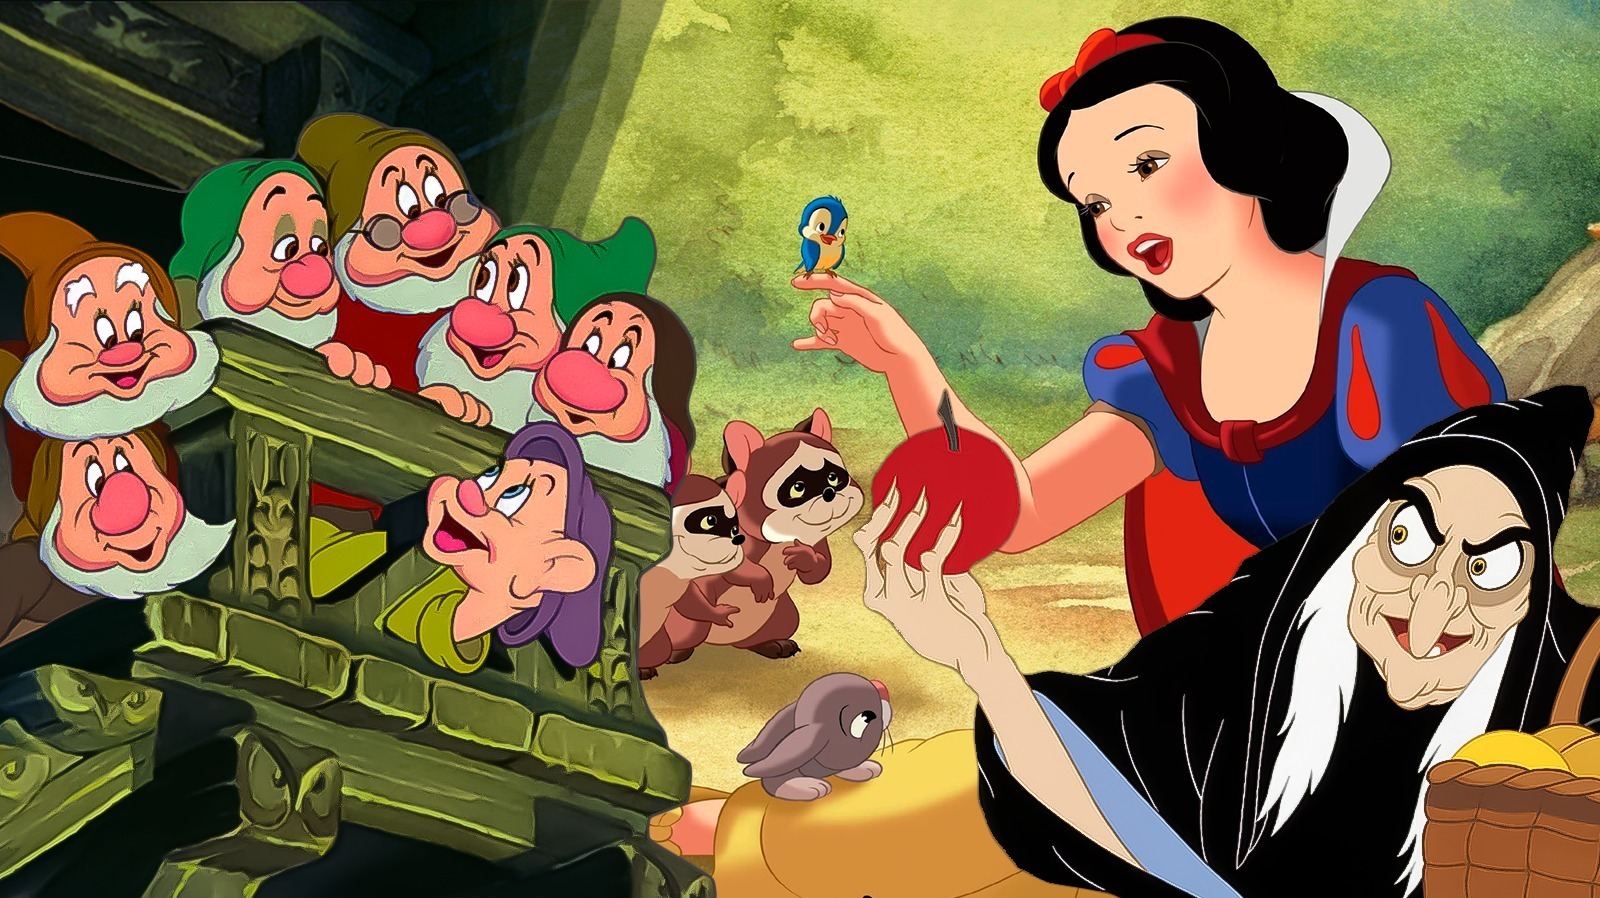 snow white: Disney's 'Snow White and the Seven Dwarfs': First full-length  animated film got released on this day in history - The Economic Times